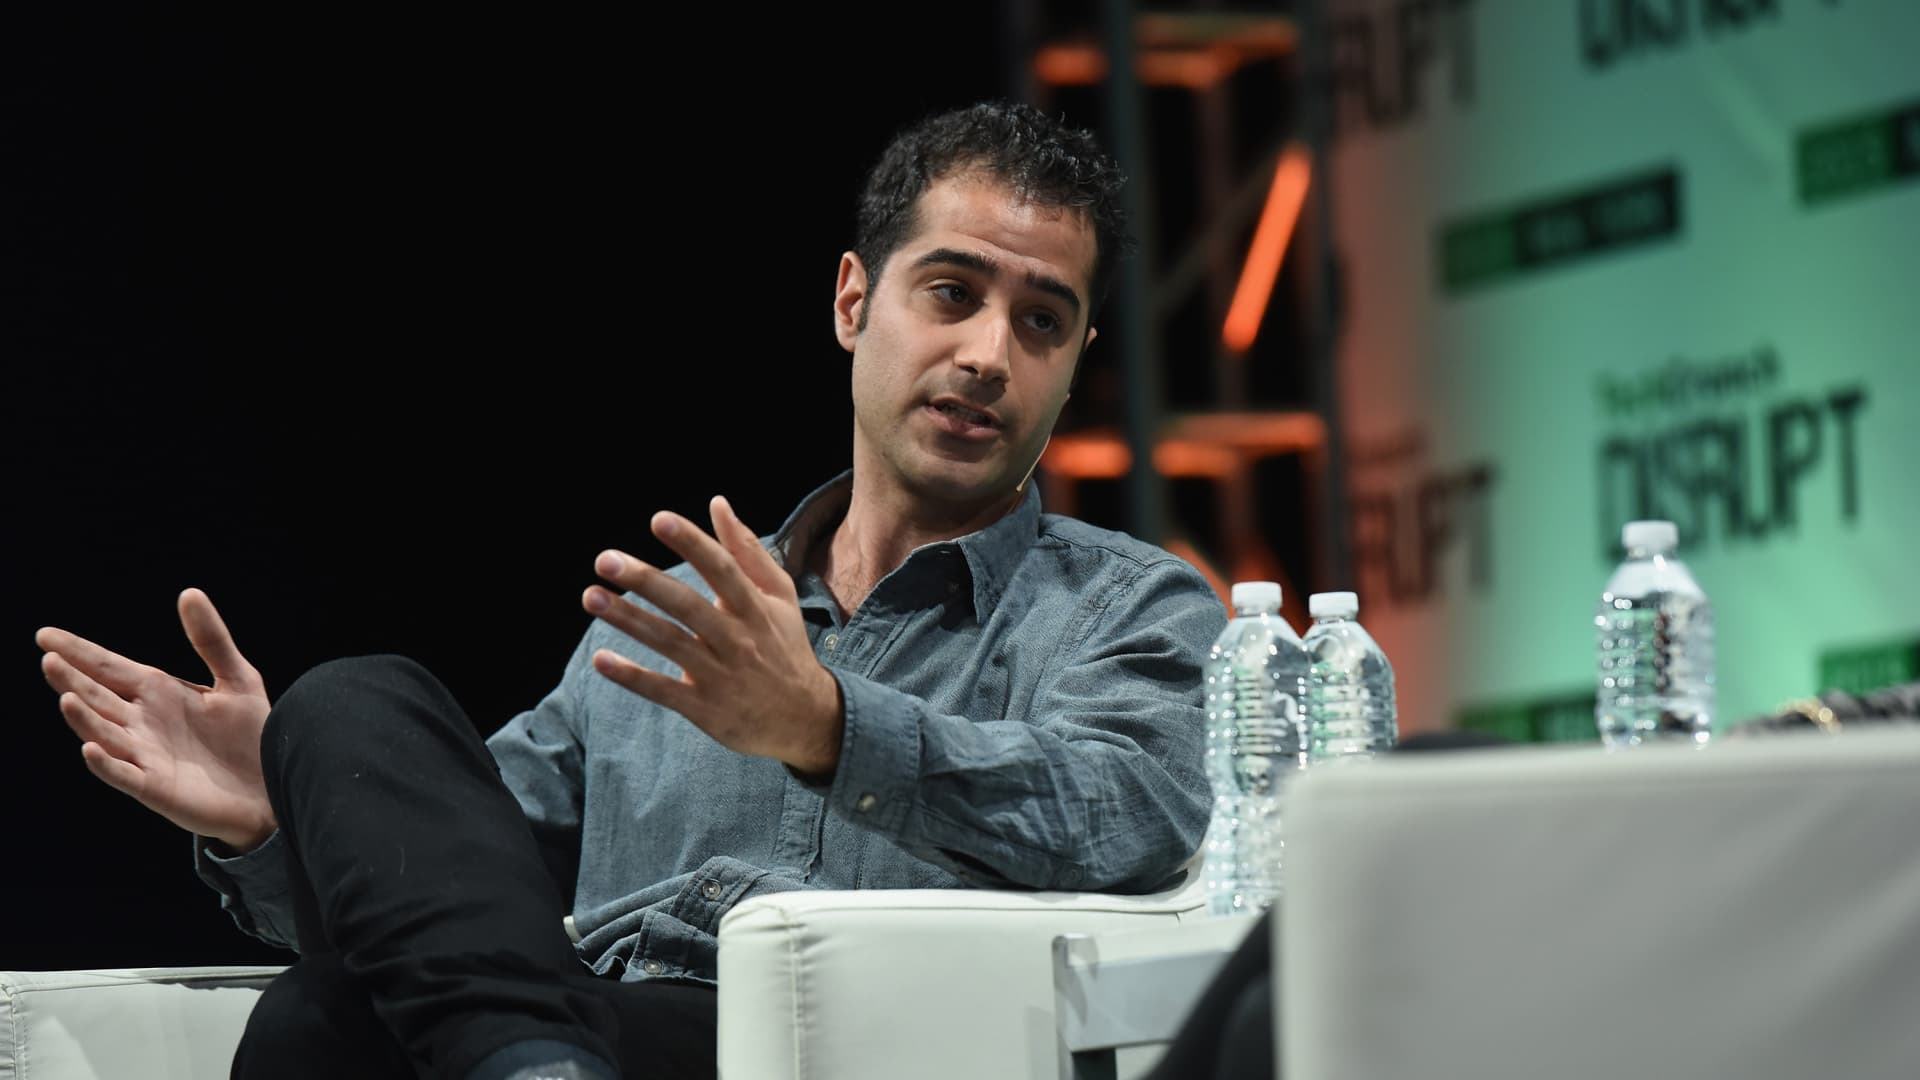 Co-founder and CEO of Periscope, Kayvon Beykpour, speaks onstage during TechCrunch Disrupt NY 2015.